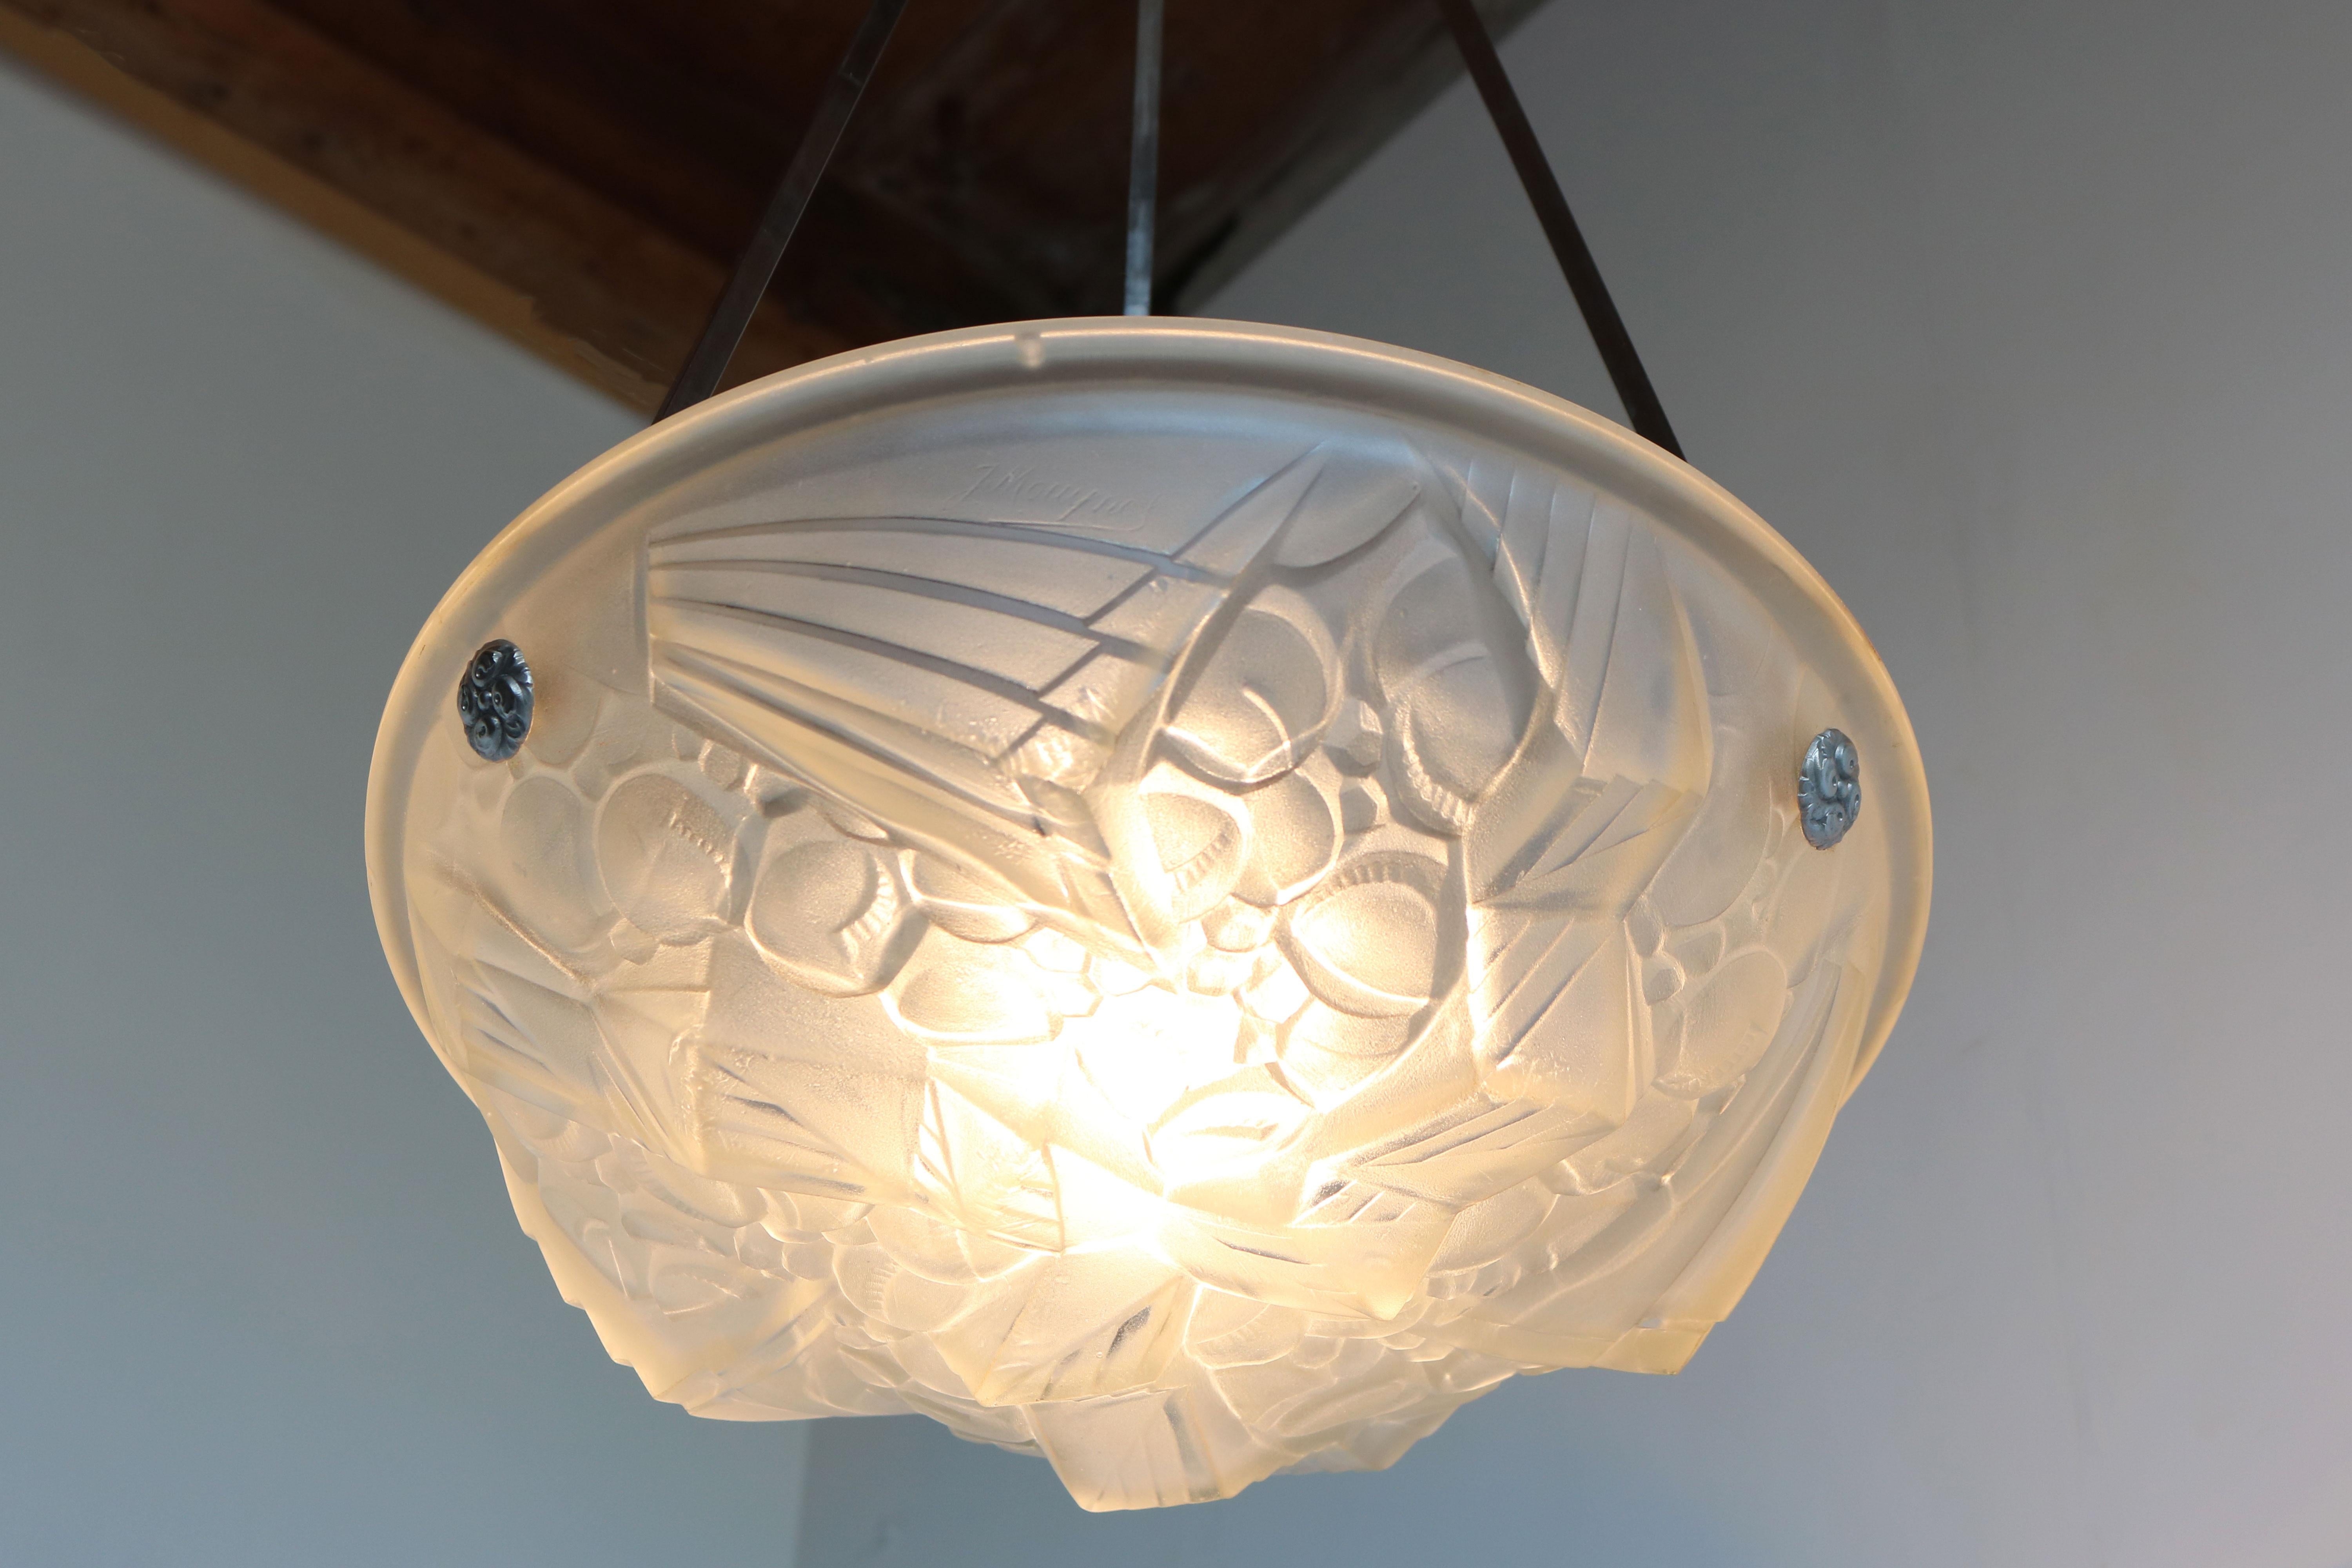 Amazing French Art Deco pendant chandelier by Mouynet (Paris), France, late 1920s. 
White frosted glass shade with a stunning Geometric Art Deco pattern. 
The frosted shade has been hand cut to display a gorgeous scenery when lit , the light